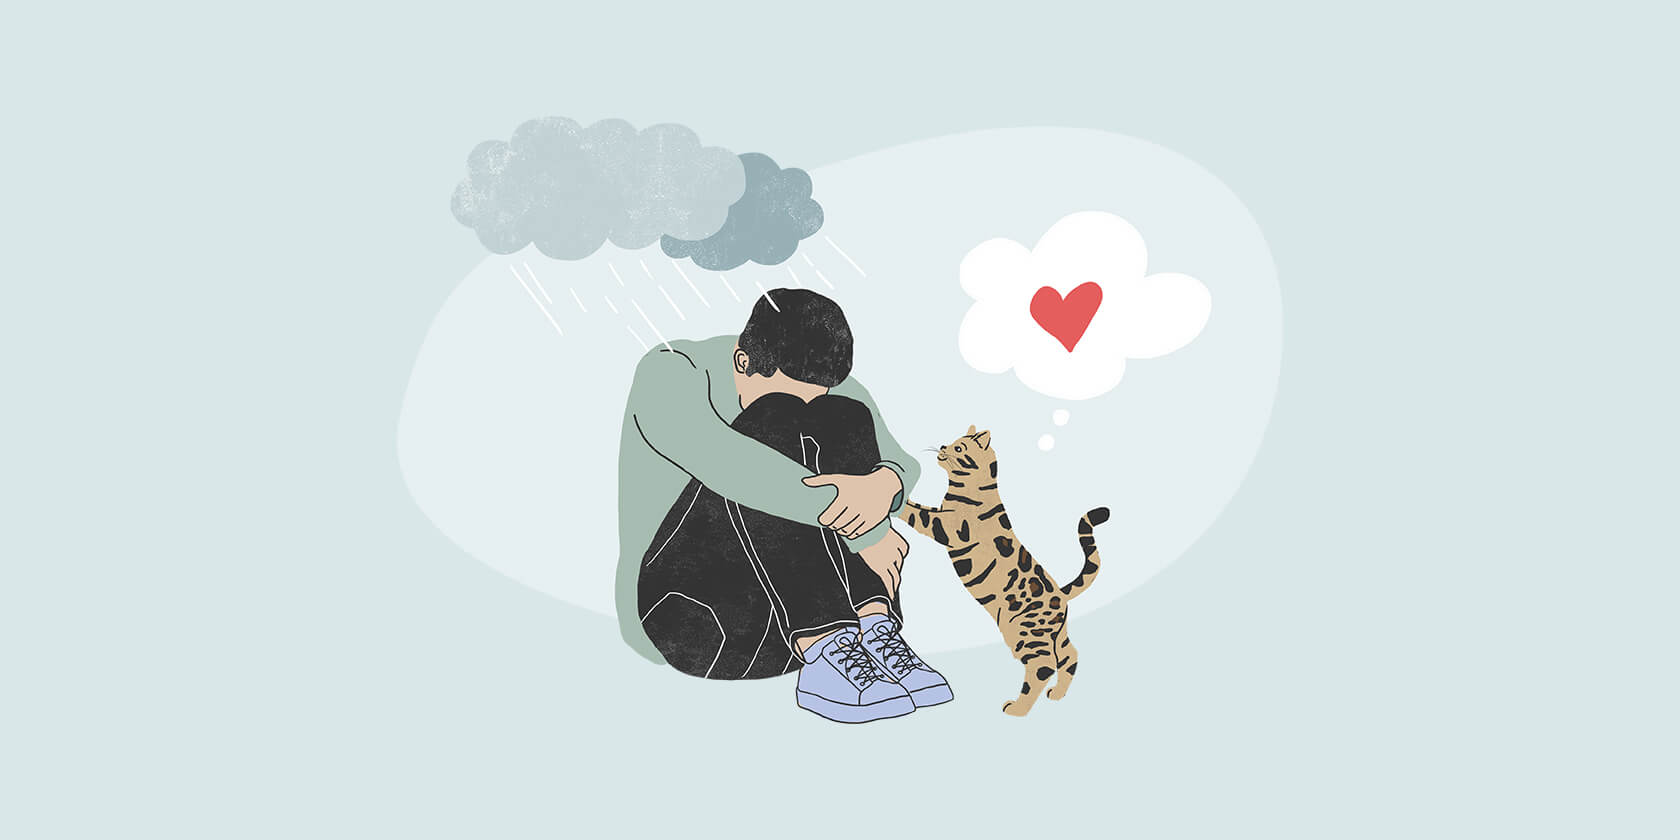 Sad person with a cat comforting them